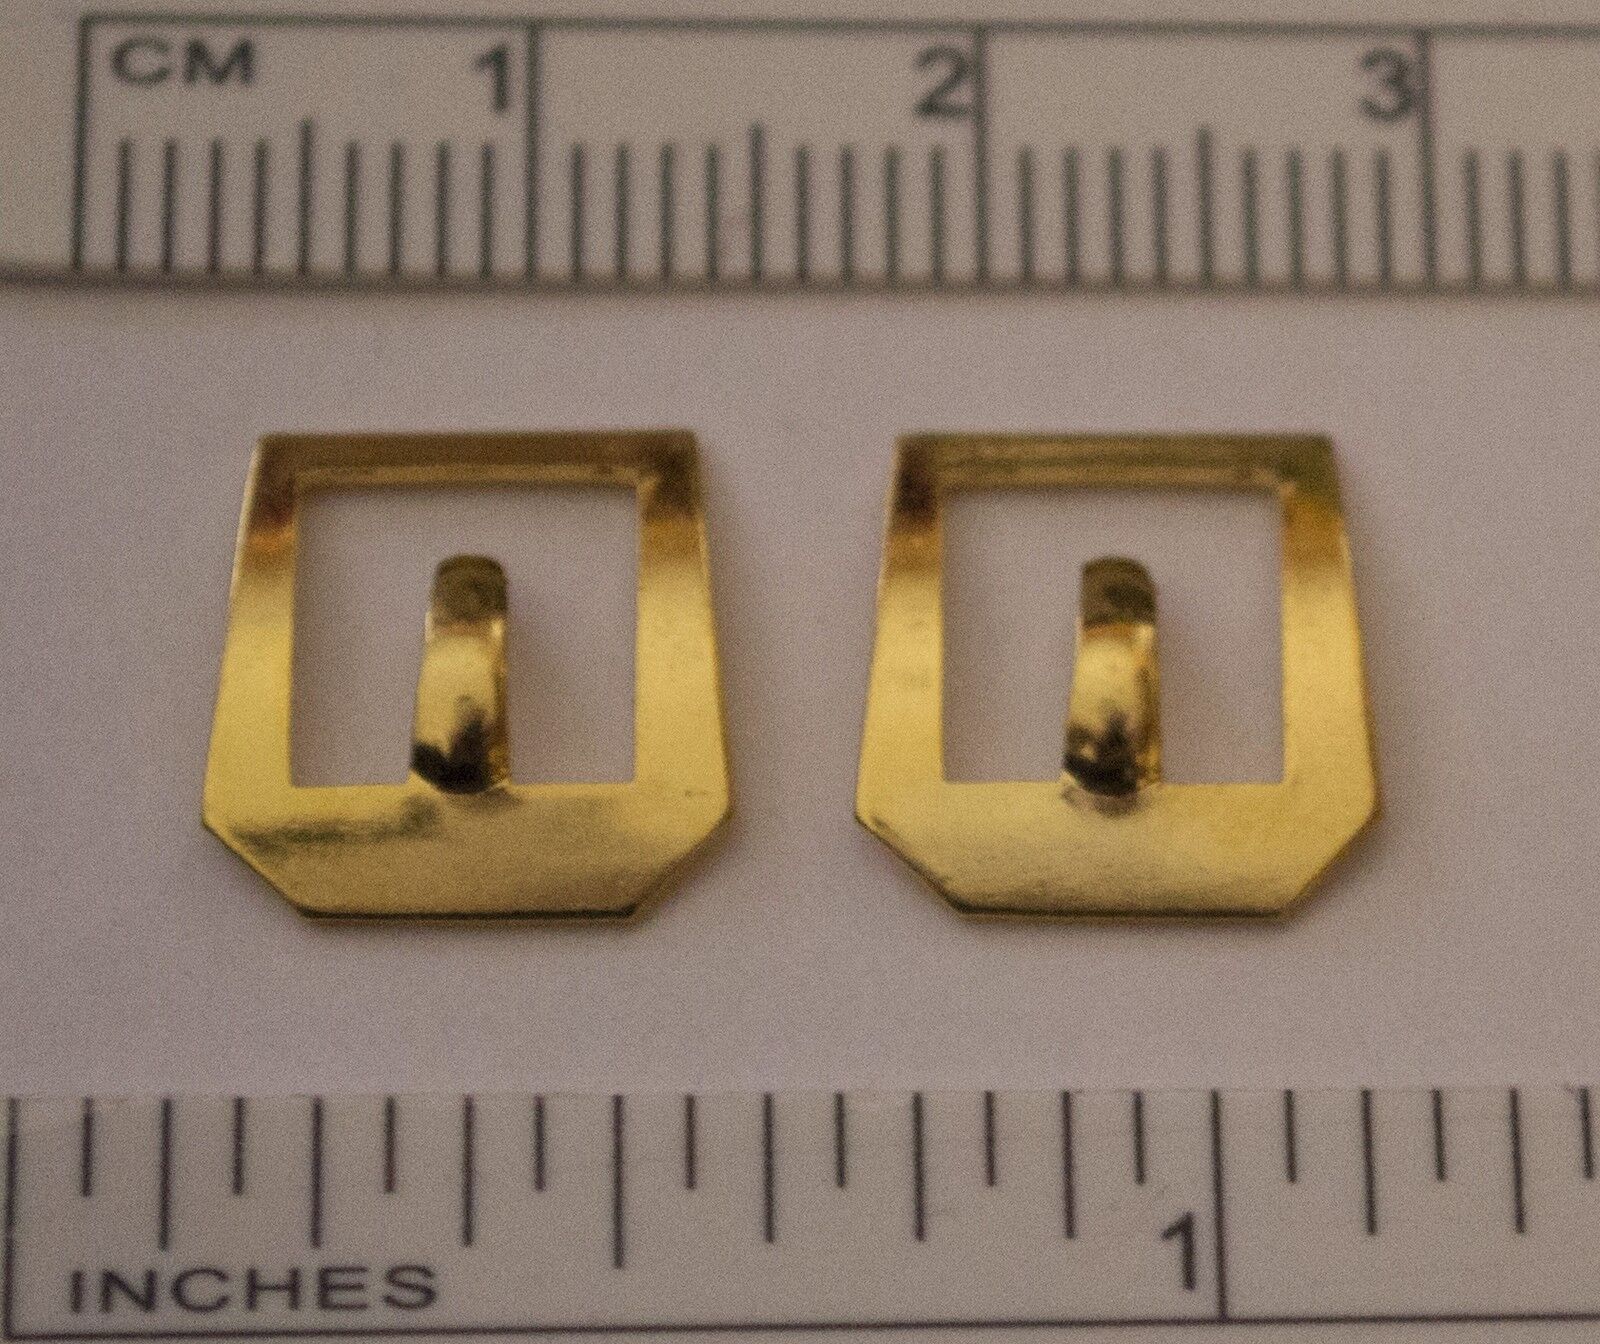 BUCKLES WITH BUILT-IN TONGUES in Traditional 1:9 or Marx 1:6 Scale - Gold Plated